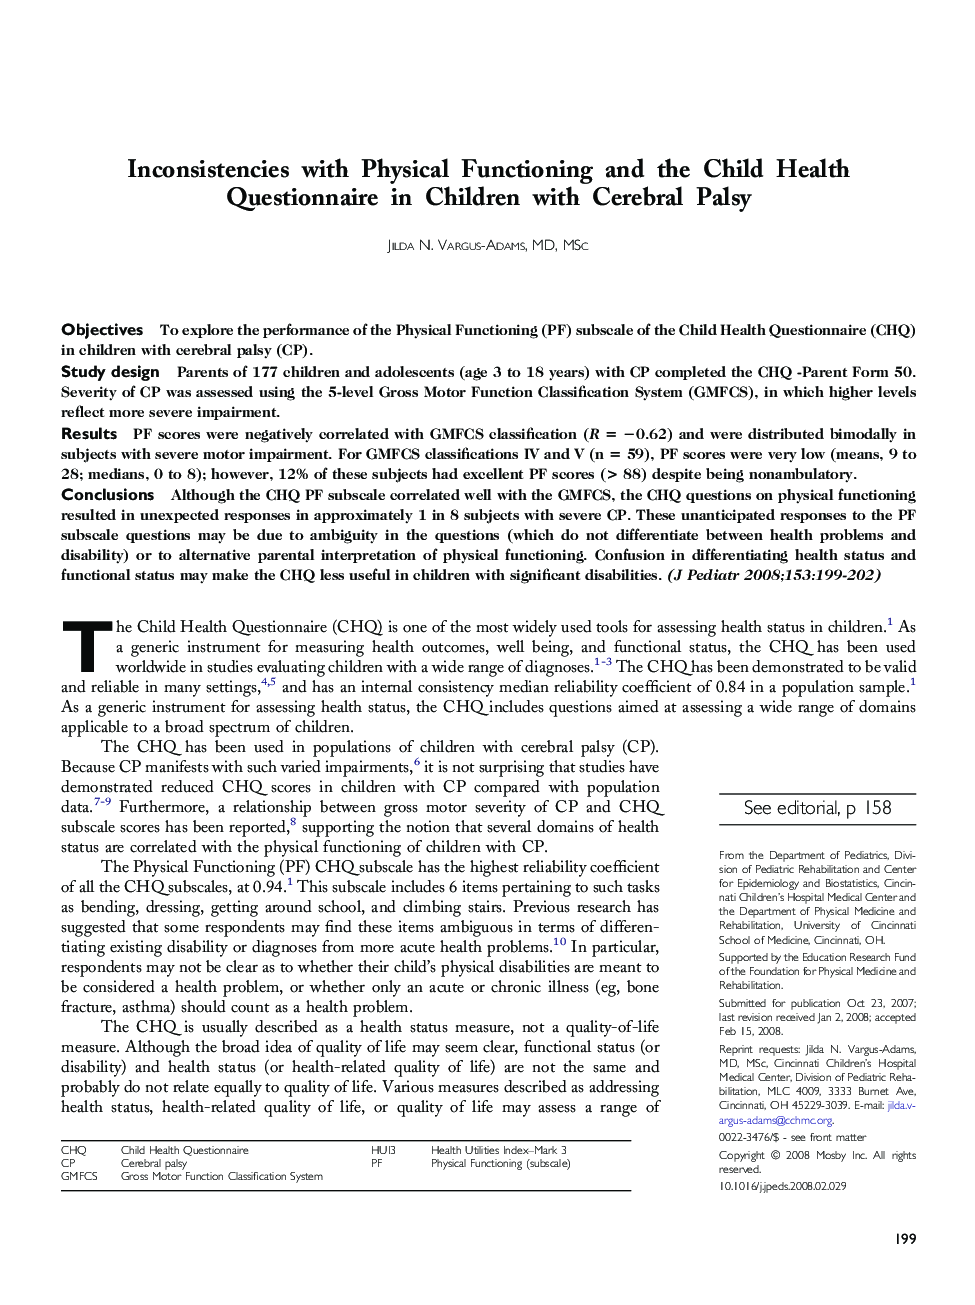 Inconsistencies with Physical Functioning and the Child Health Questionnaire in Children with Cerebral Palsy